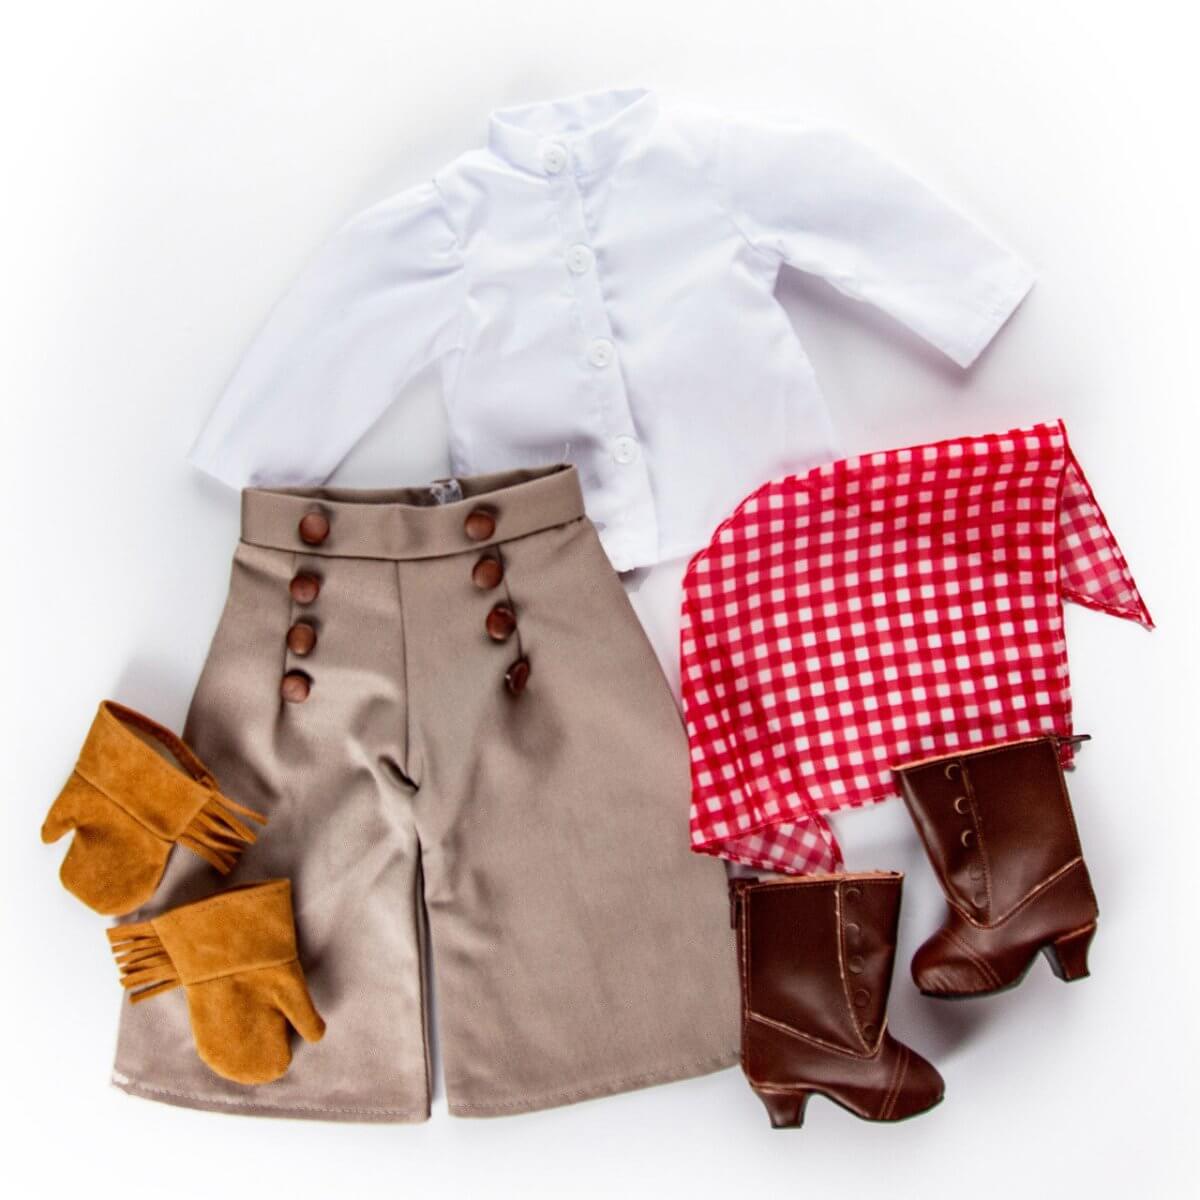 7 Piece Frontier Girl Outfit with Boots, Clothes & Accessories for 18 Inch Dolls - Simon's Collectibles